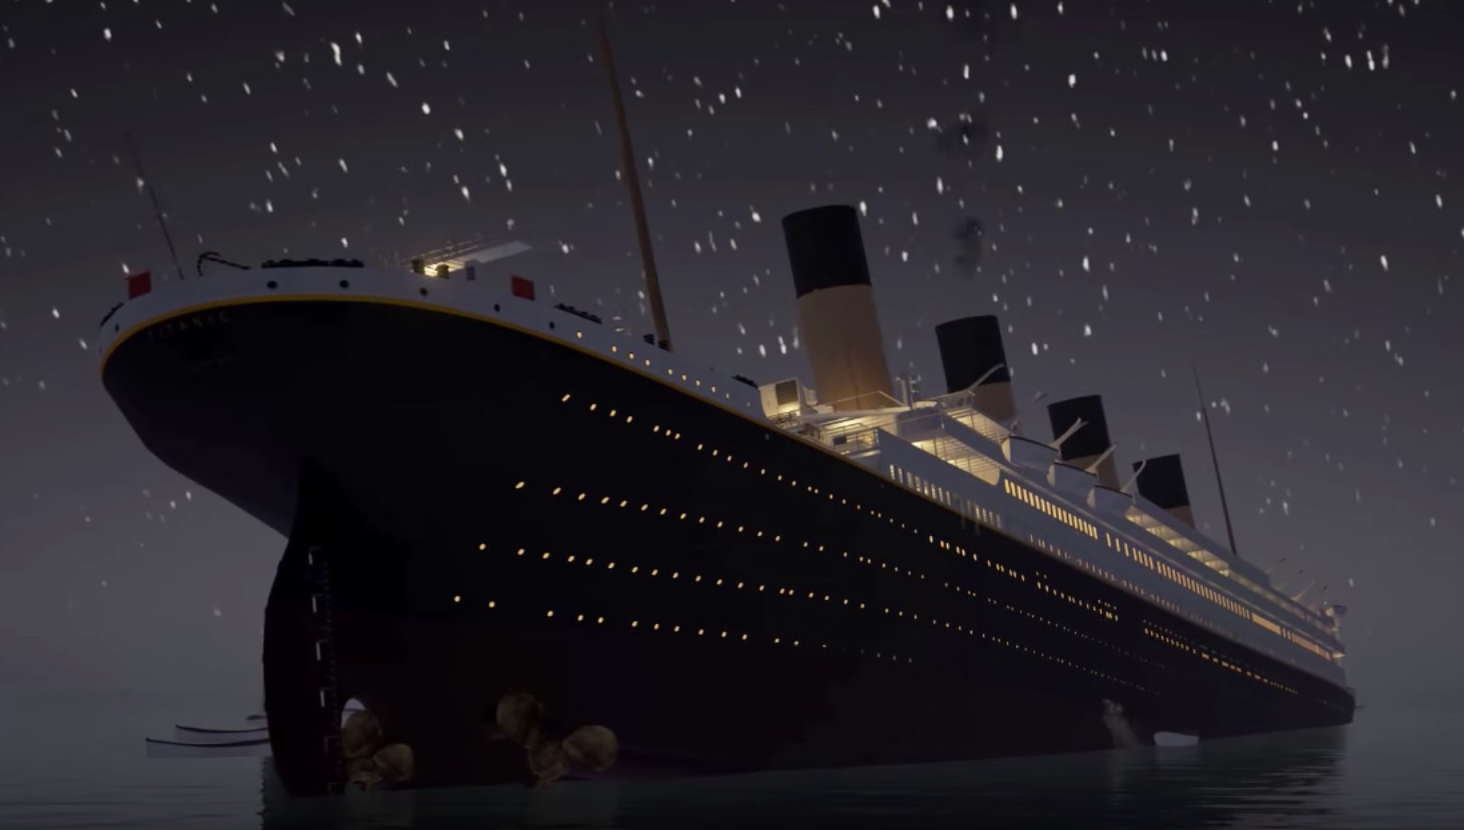 Titanic sinking in real-time | FlowingData